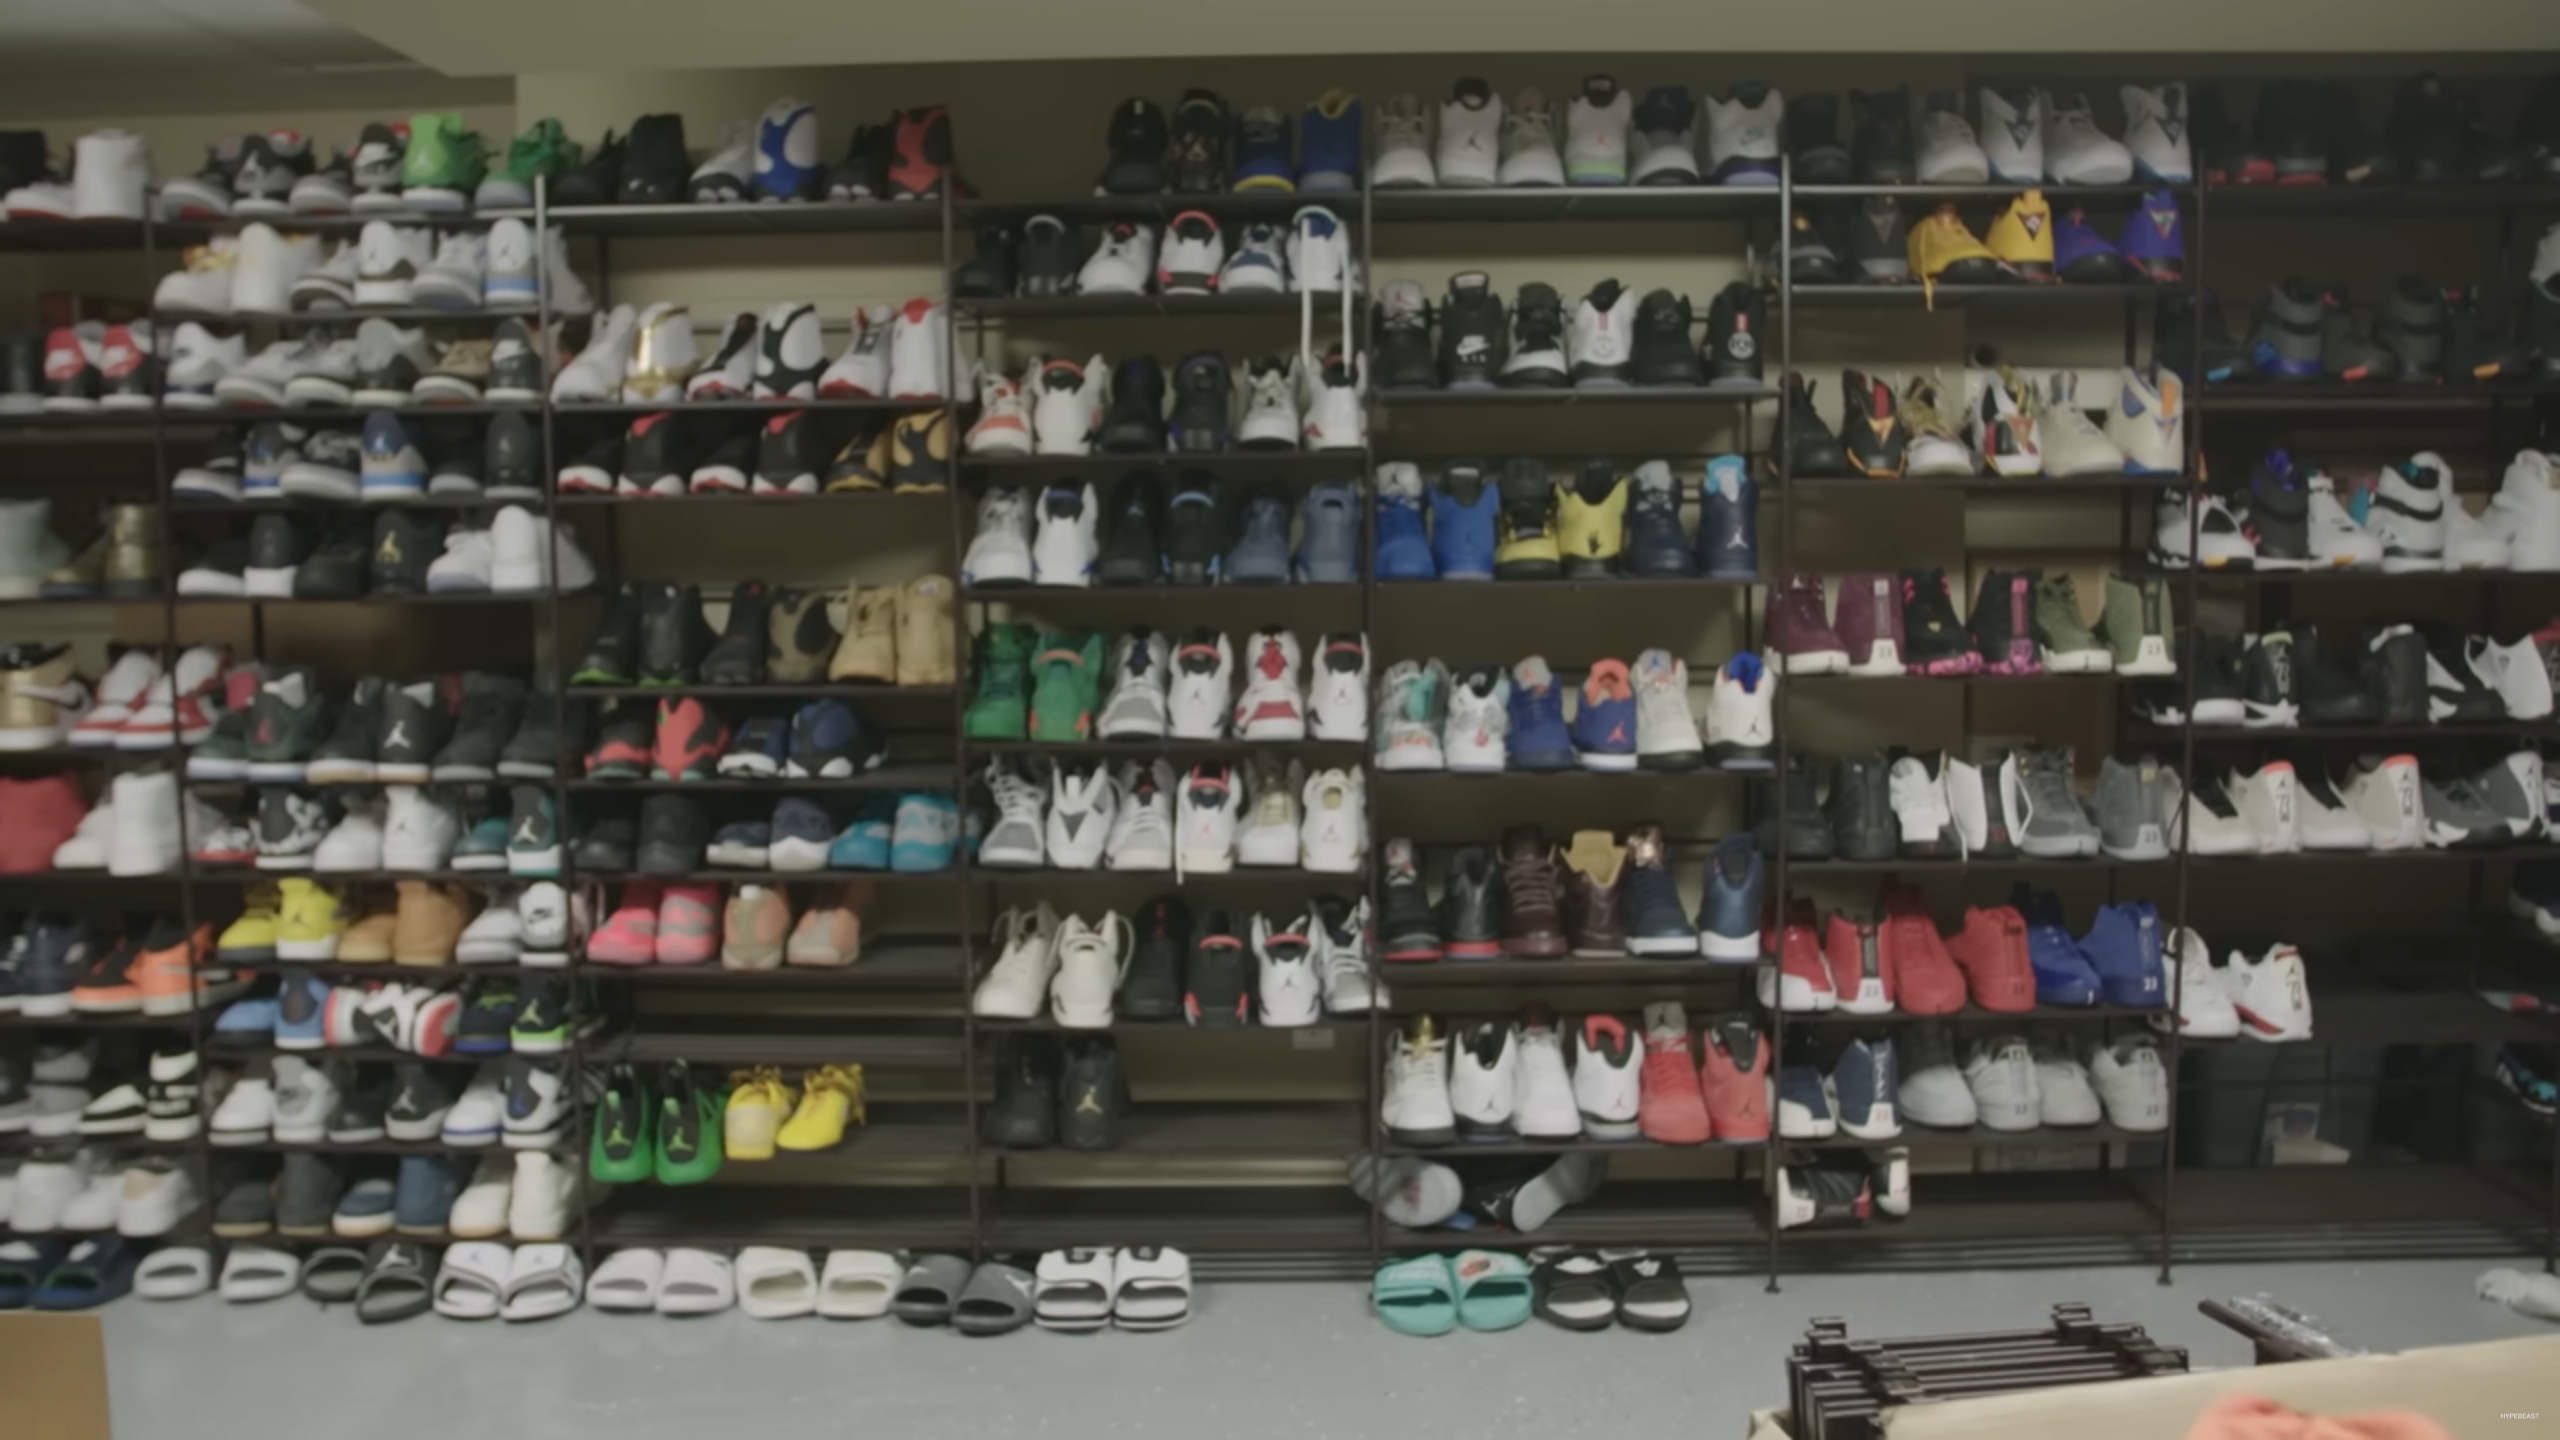 The NBA star owns dozens of sneakers, including exclusive Air Jordans